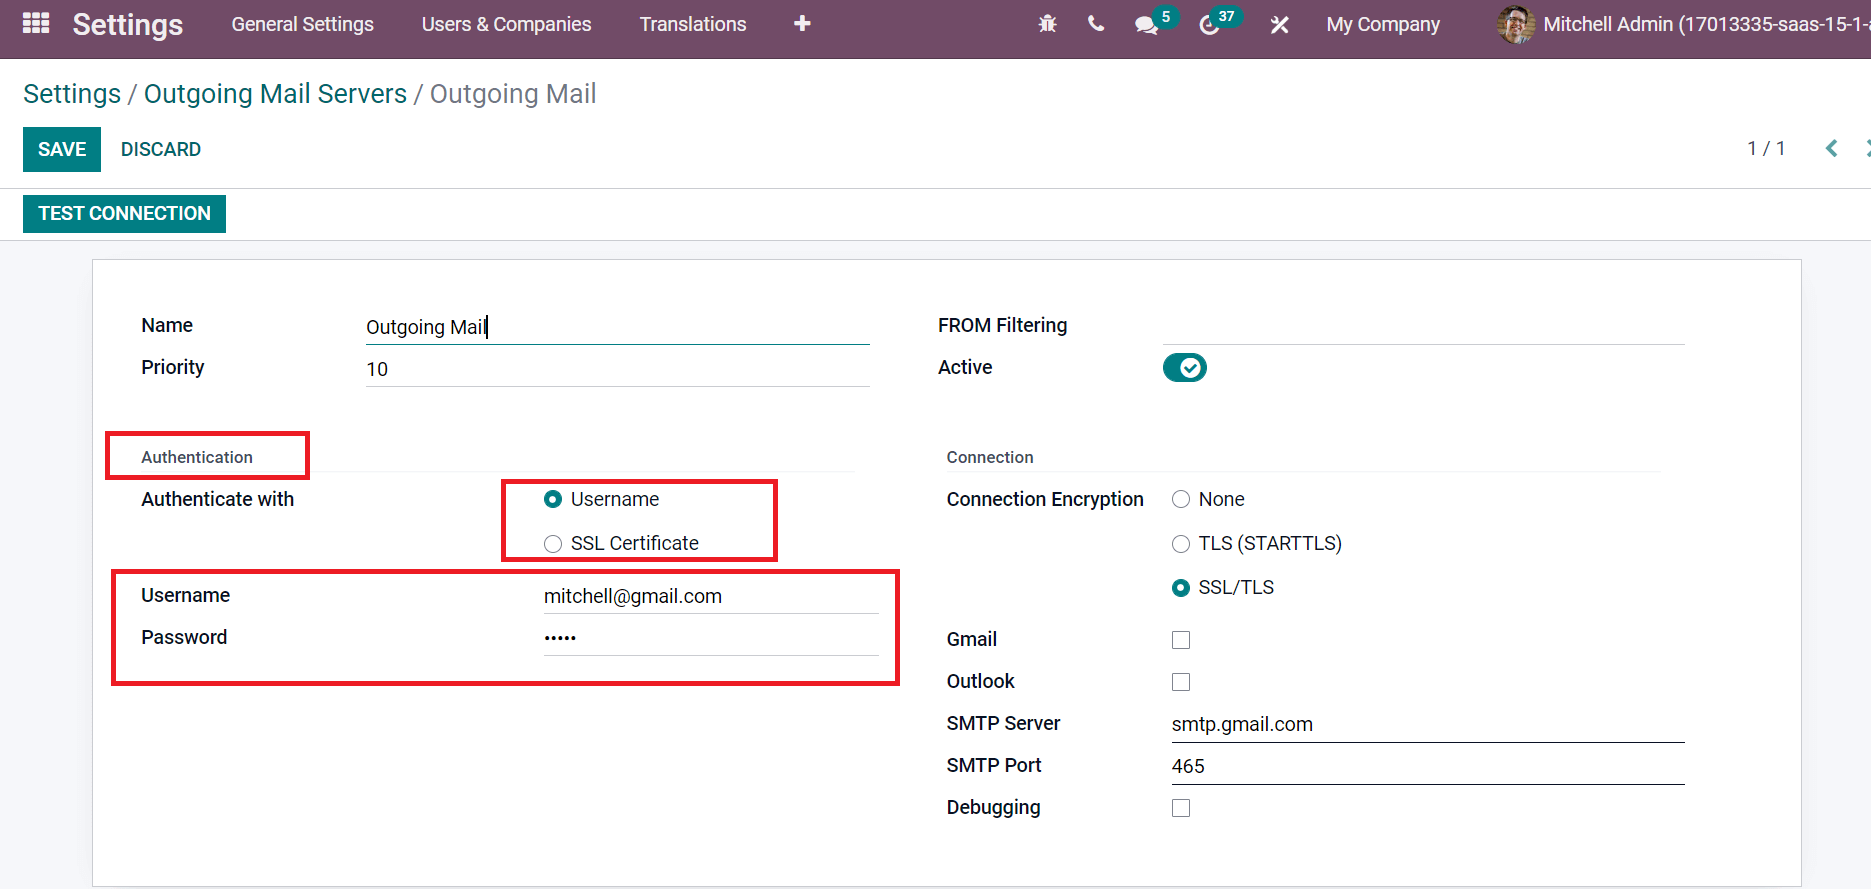 receipt-confirmation-of-a-purchase-order-with-odoo-15-cybrosys